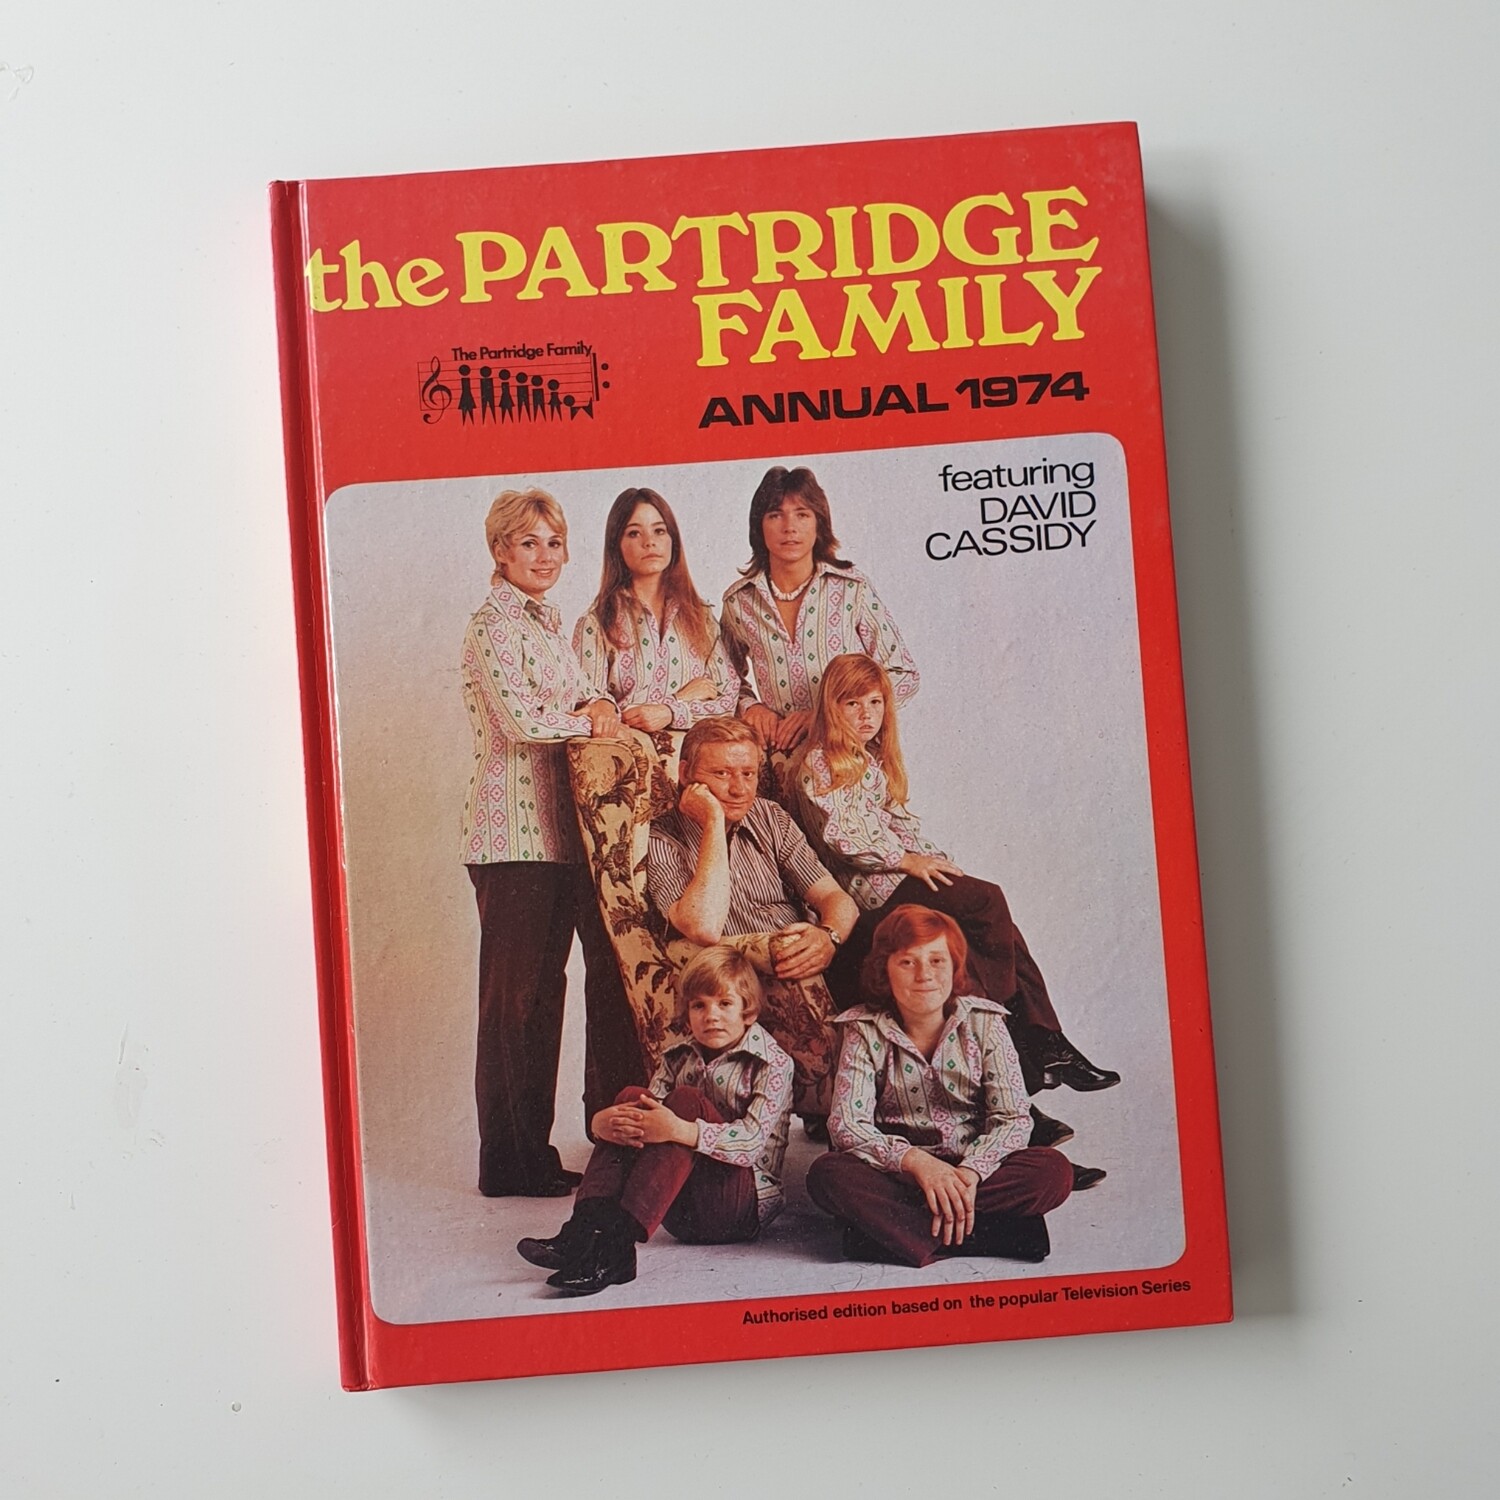 The Partridge Family 1974, Featuring David Cassidy